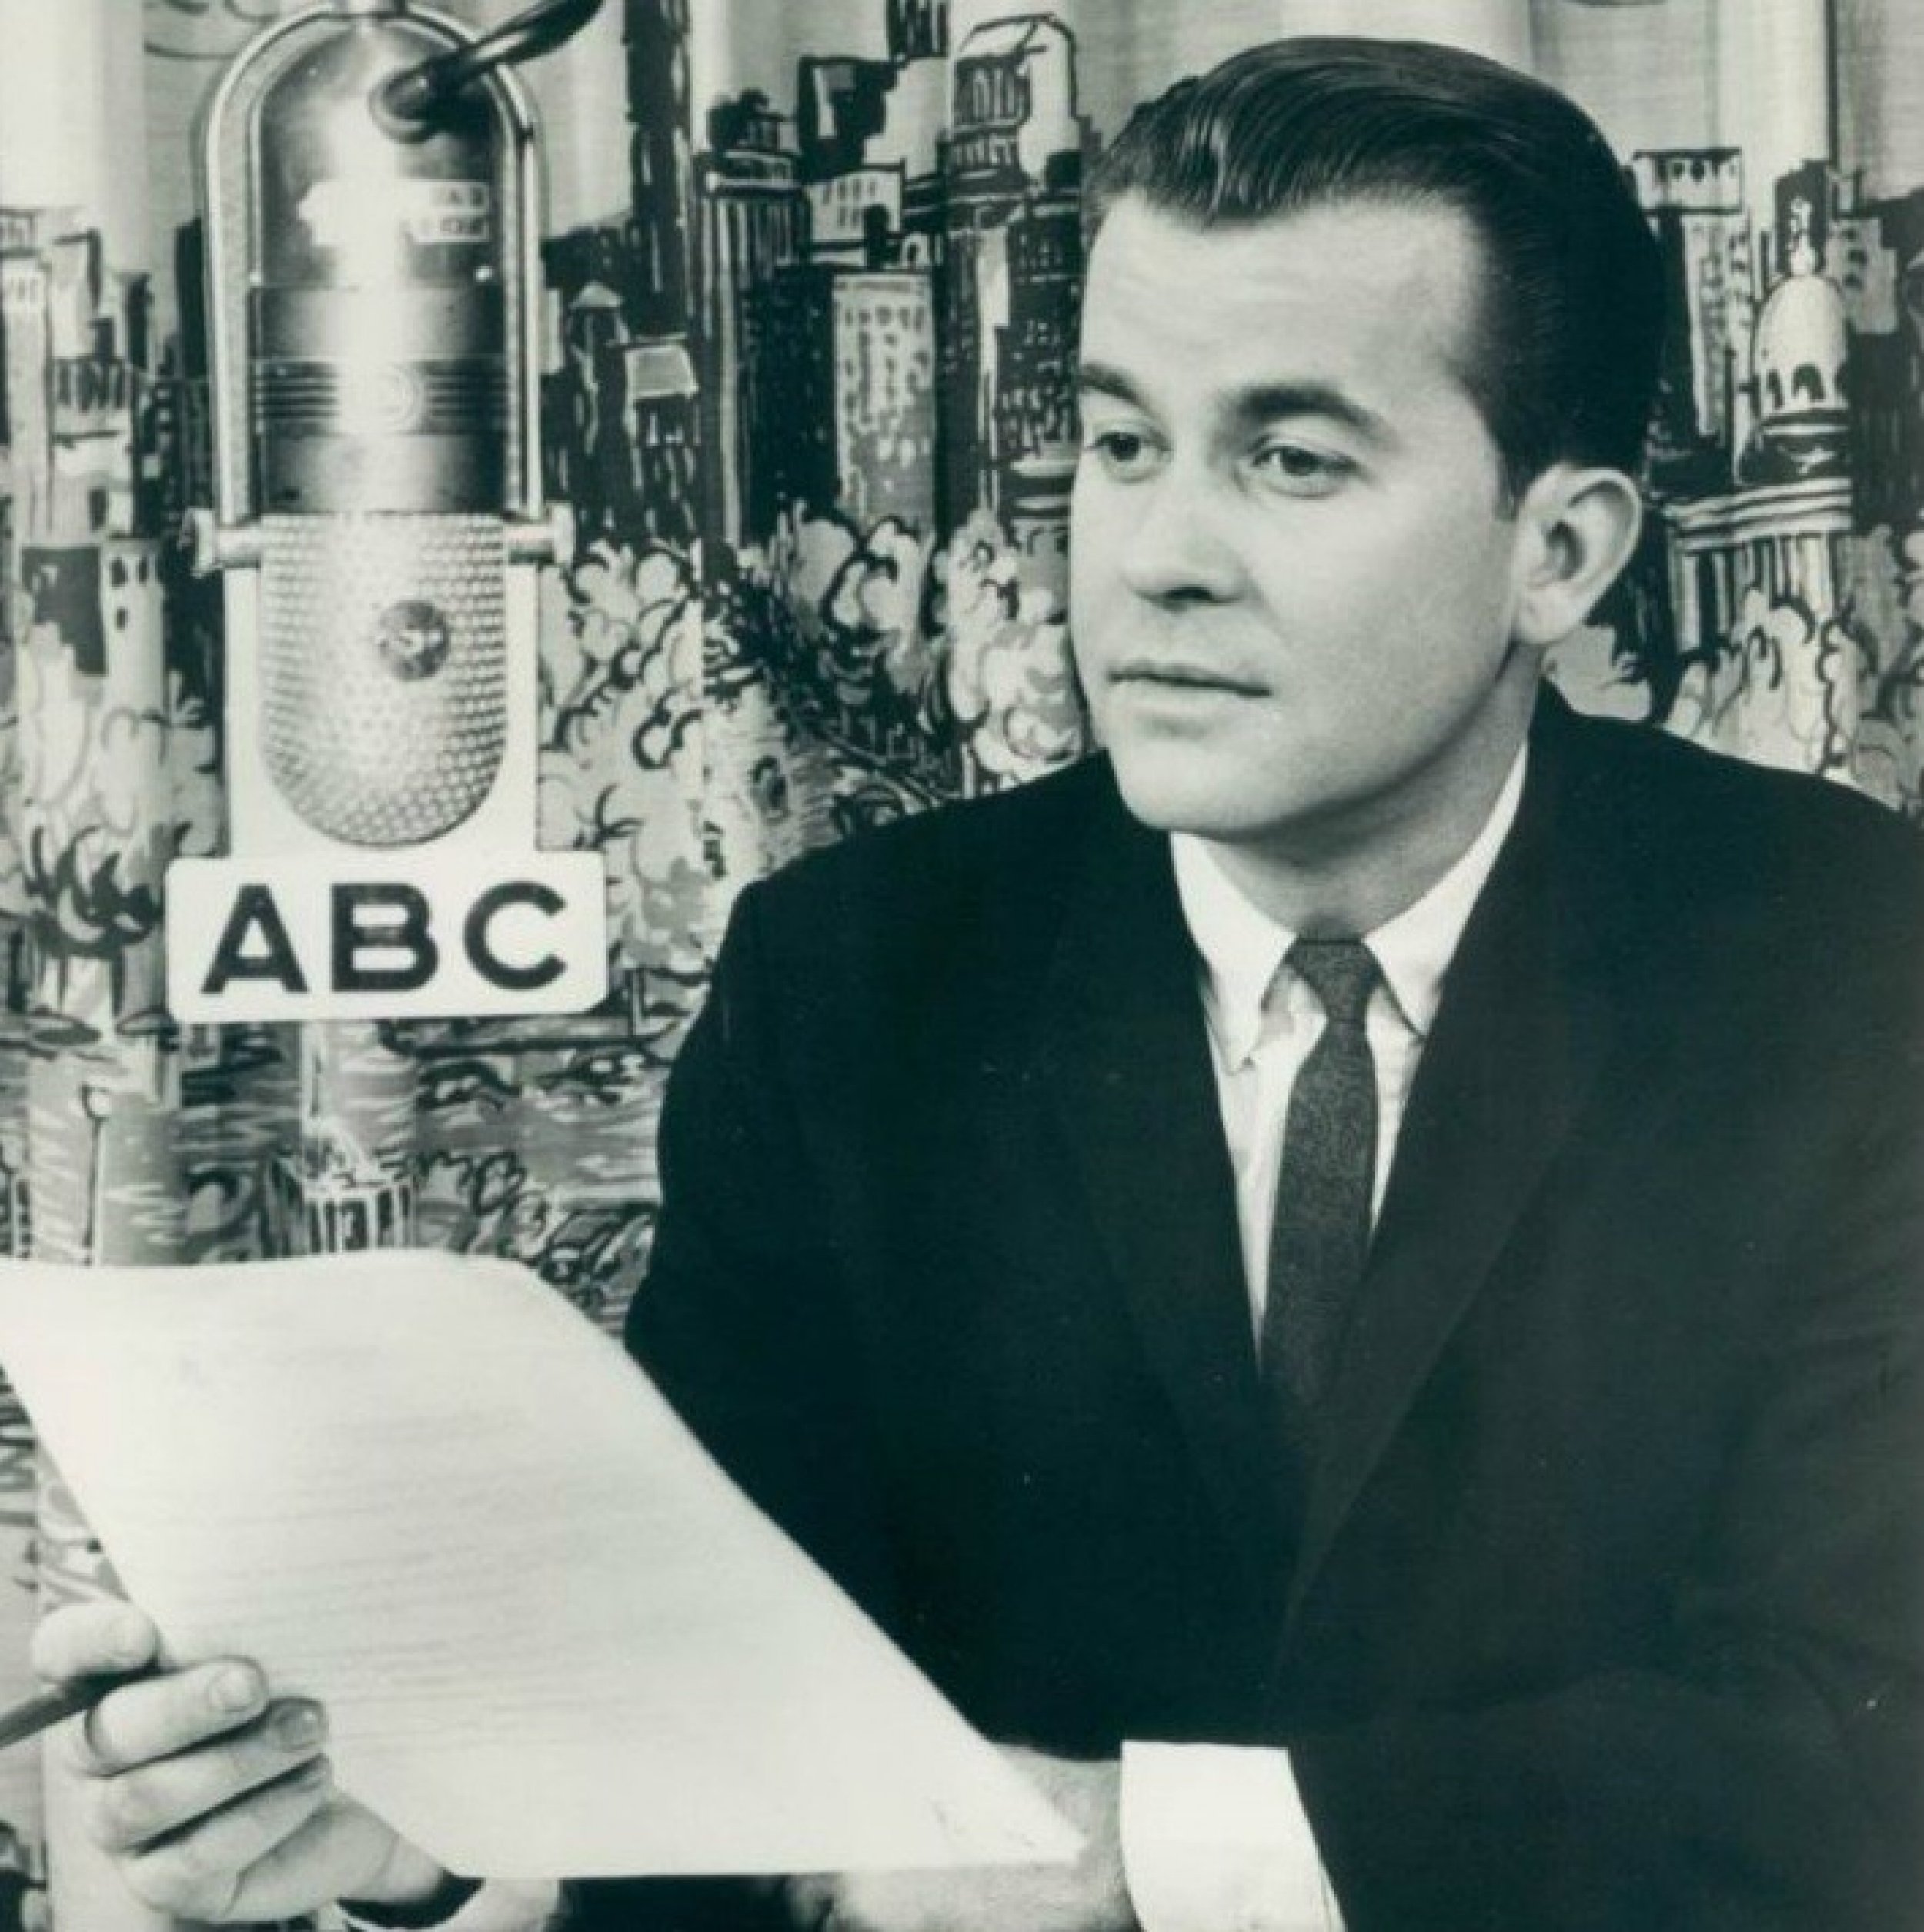 Dick Clark Reads For ABC